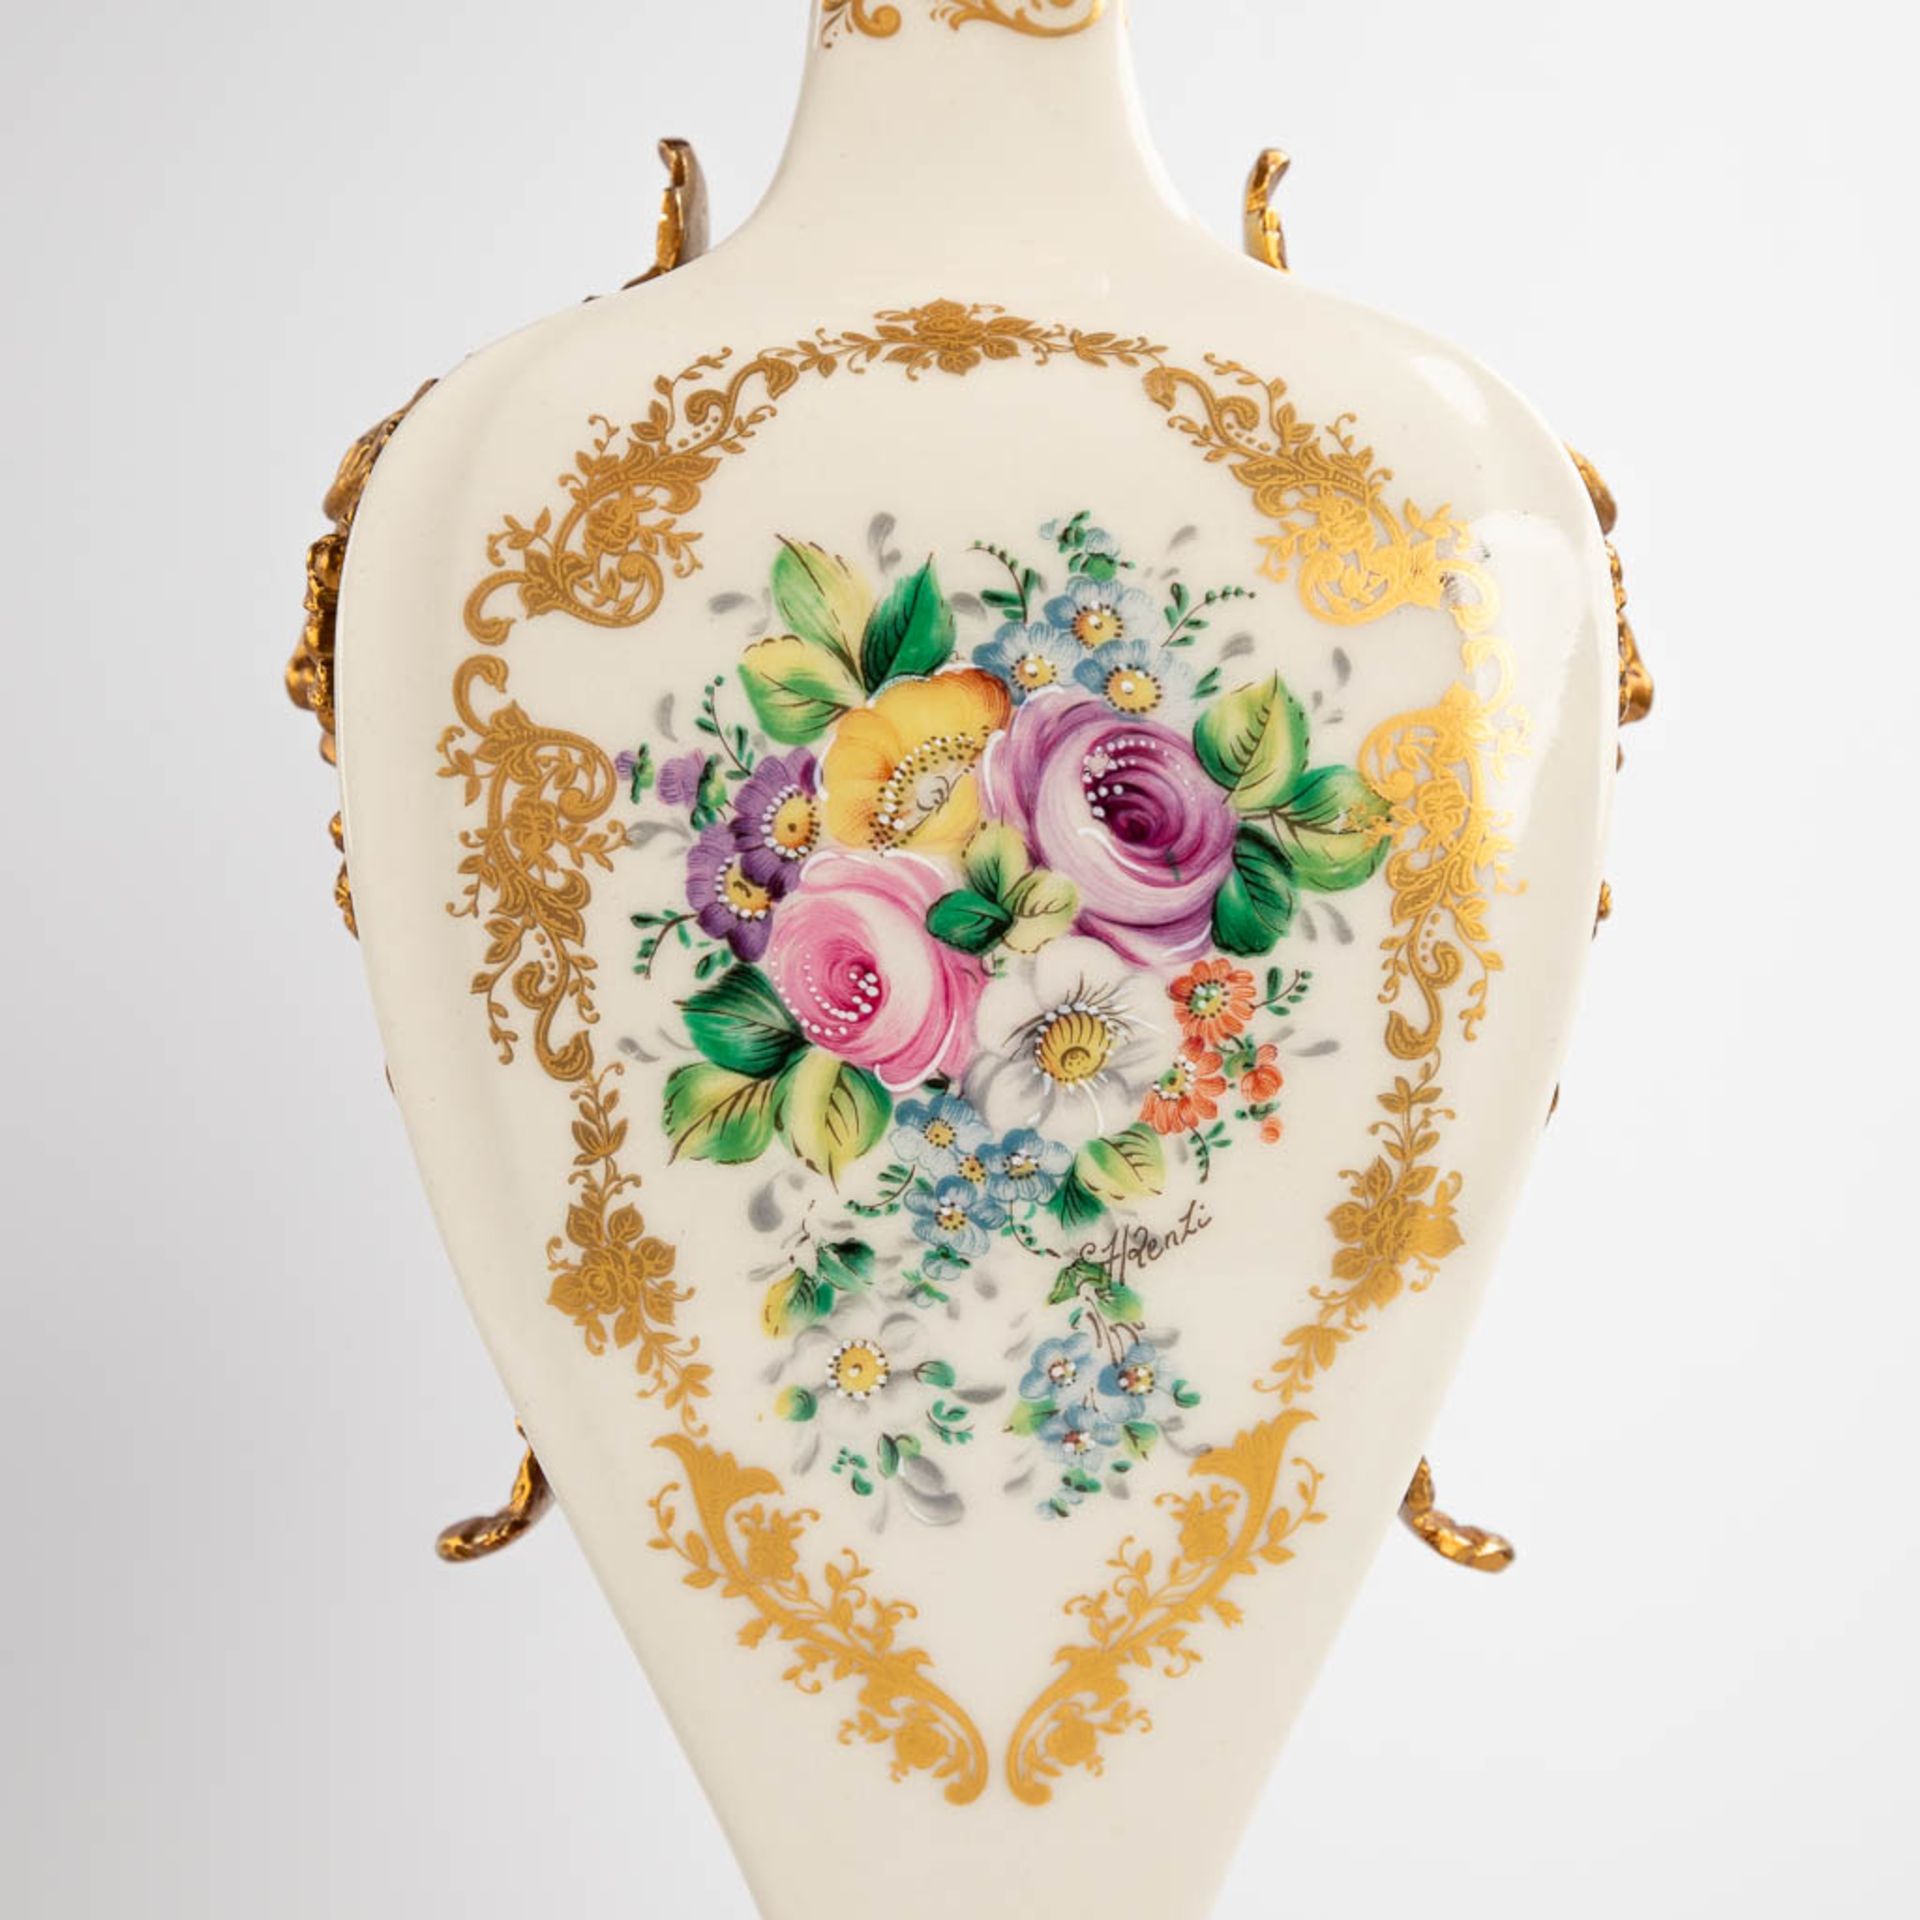 A three-piece mantle garniture clock and side pieces, porcelain mounted with bronze and floral decor - Image 11 of 14